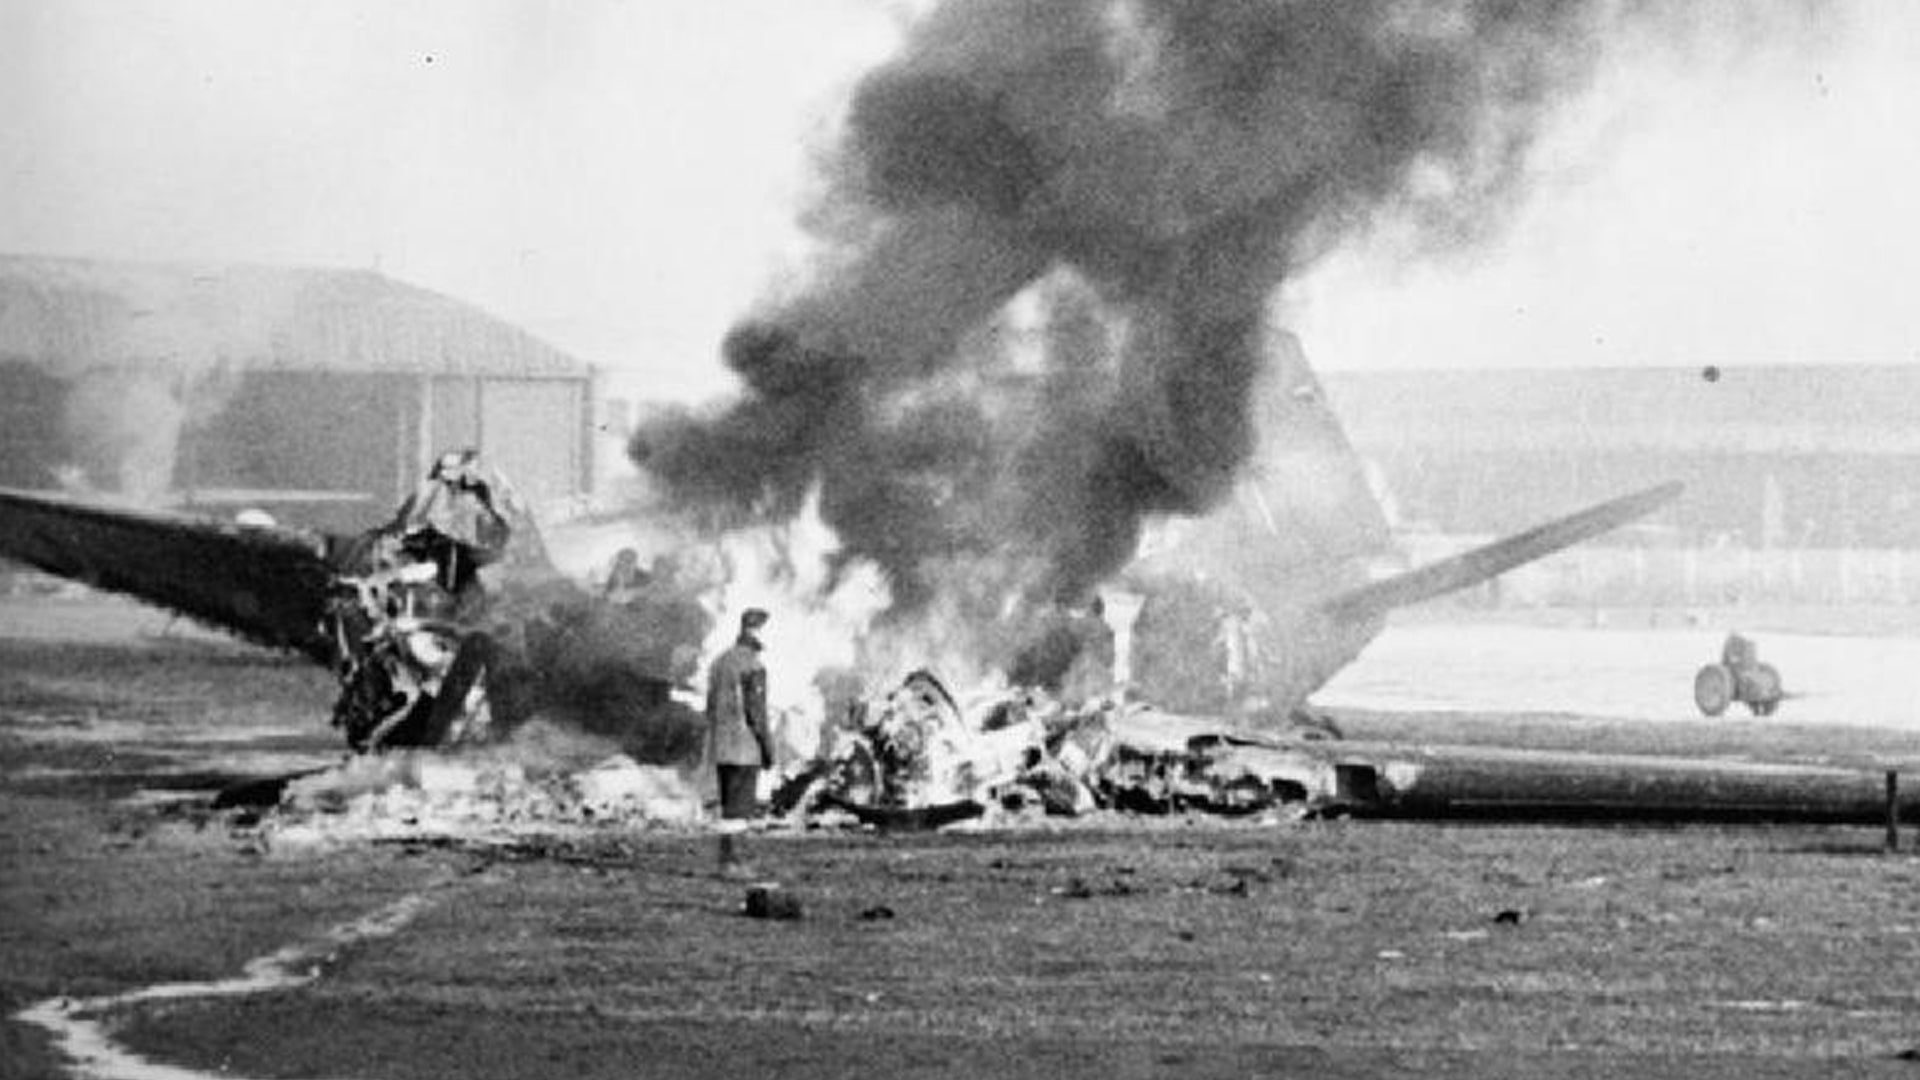 A Douglas Dakota of RAF Transport Command, destroyed during the attack on B58/Melsbroek, Belgium, by Luftwaffe fighter-bombers during Operation Bodenplatte in World War II, burns itself out. (Royal Air Force)